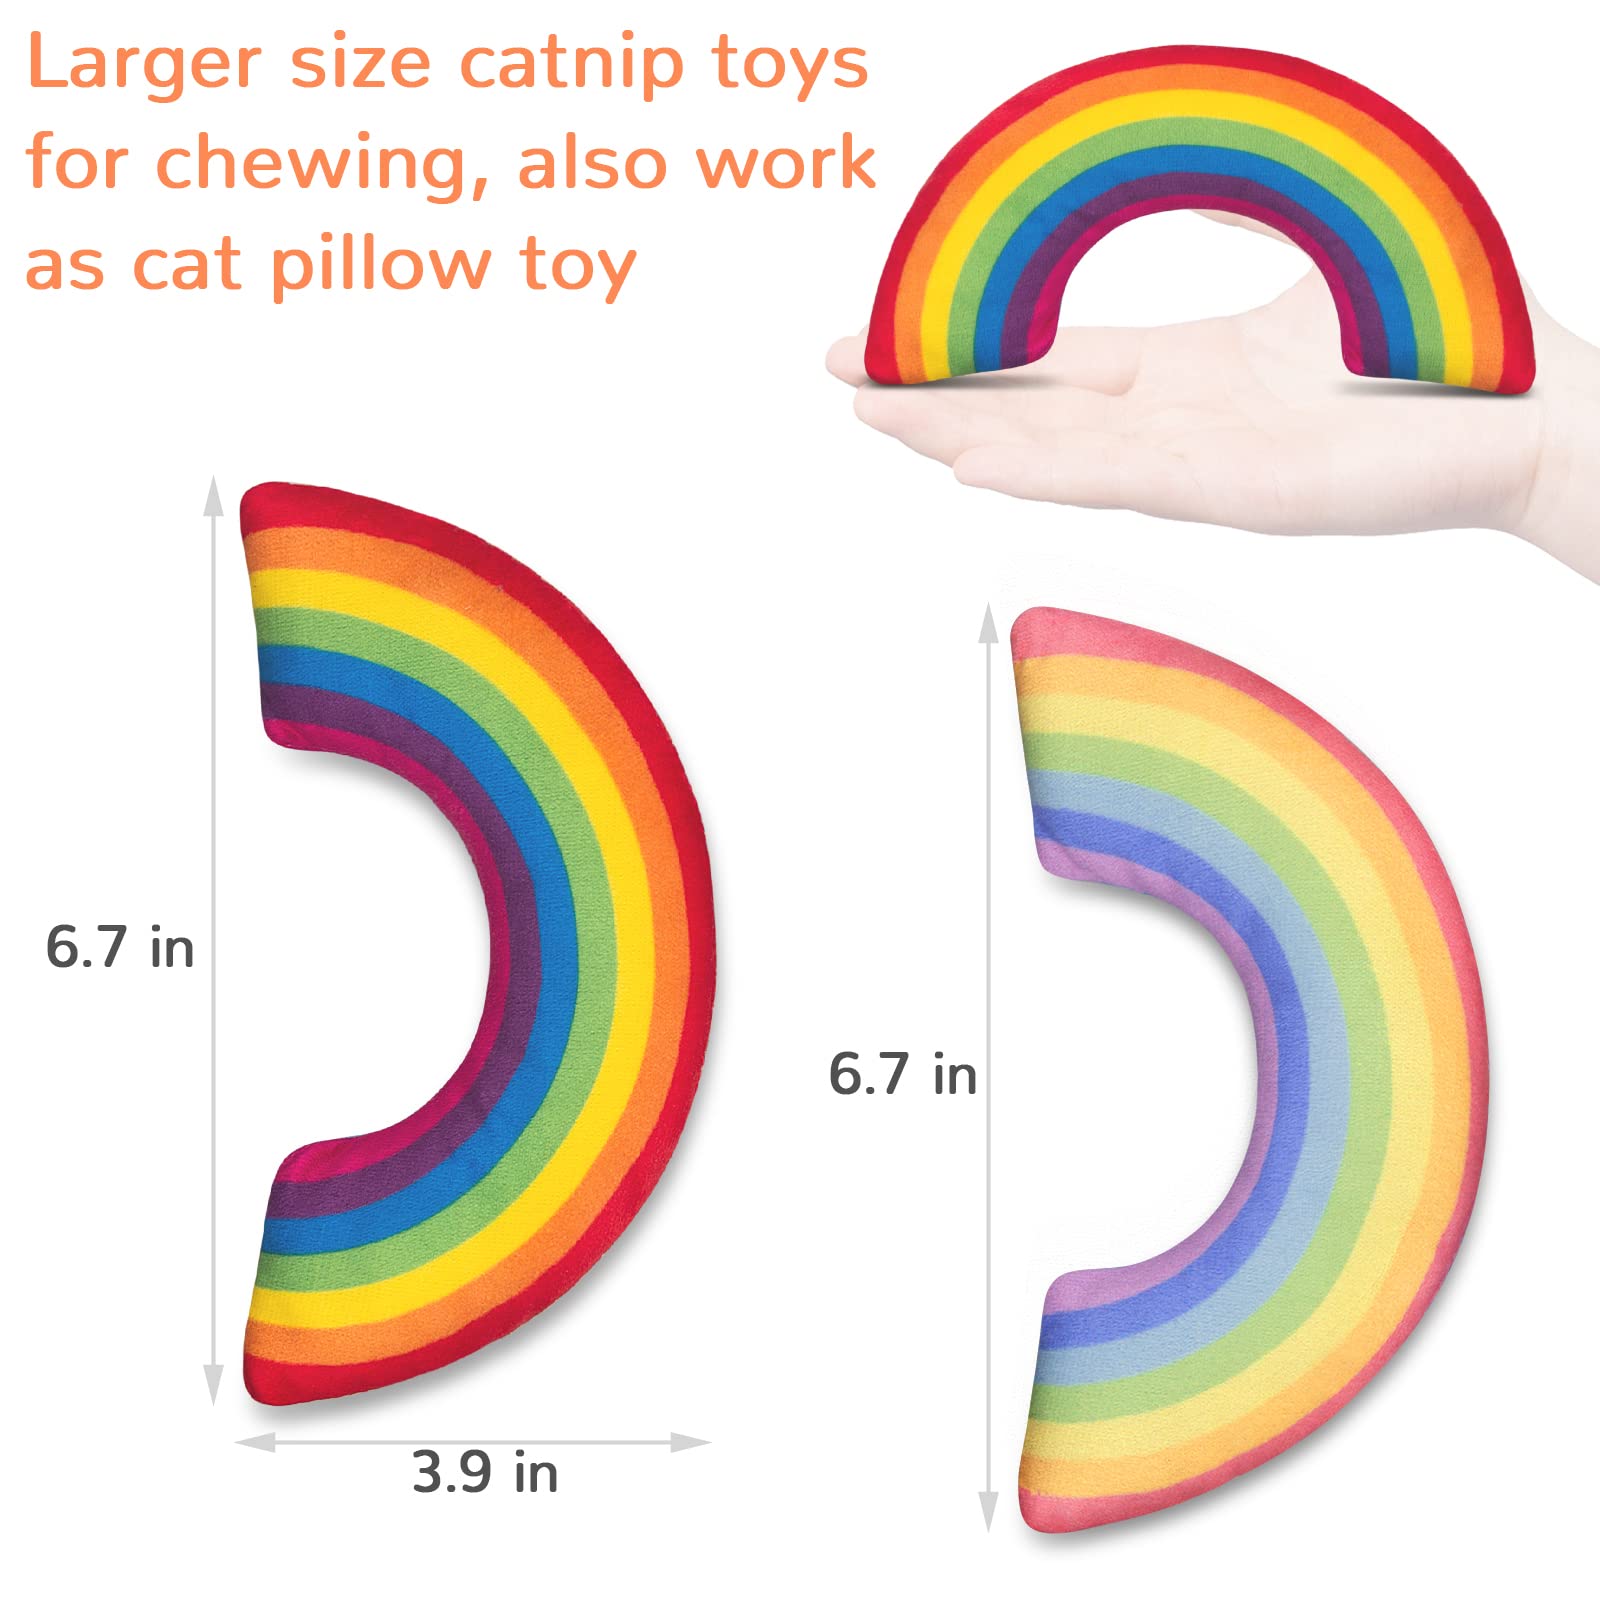 ETEKYER Catnip Toys, Catnip Toys for Cats, Cat Toys, Cat Toys for Indoor Cats, Cat Toys with Catnip, Interactive Cat Teething Chew Toys Cat Pillow Toys for Kitten Kitty, 2 Pack